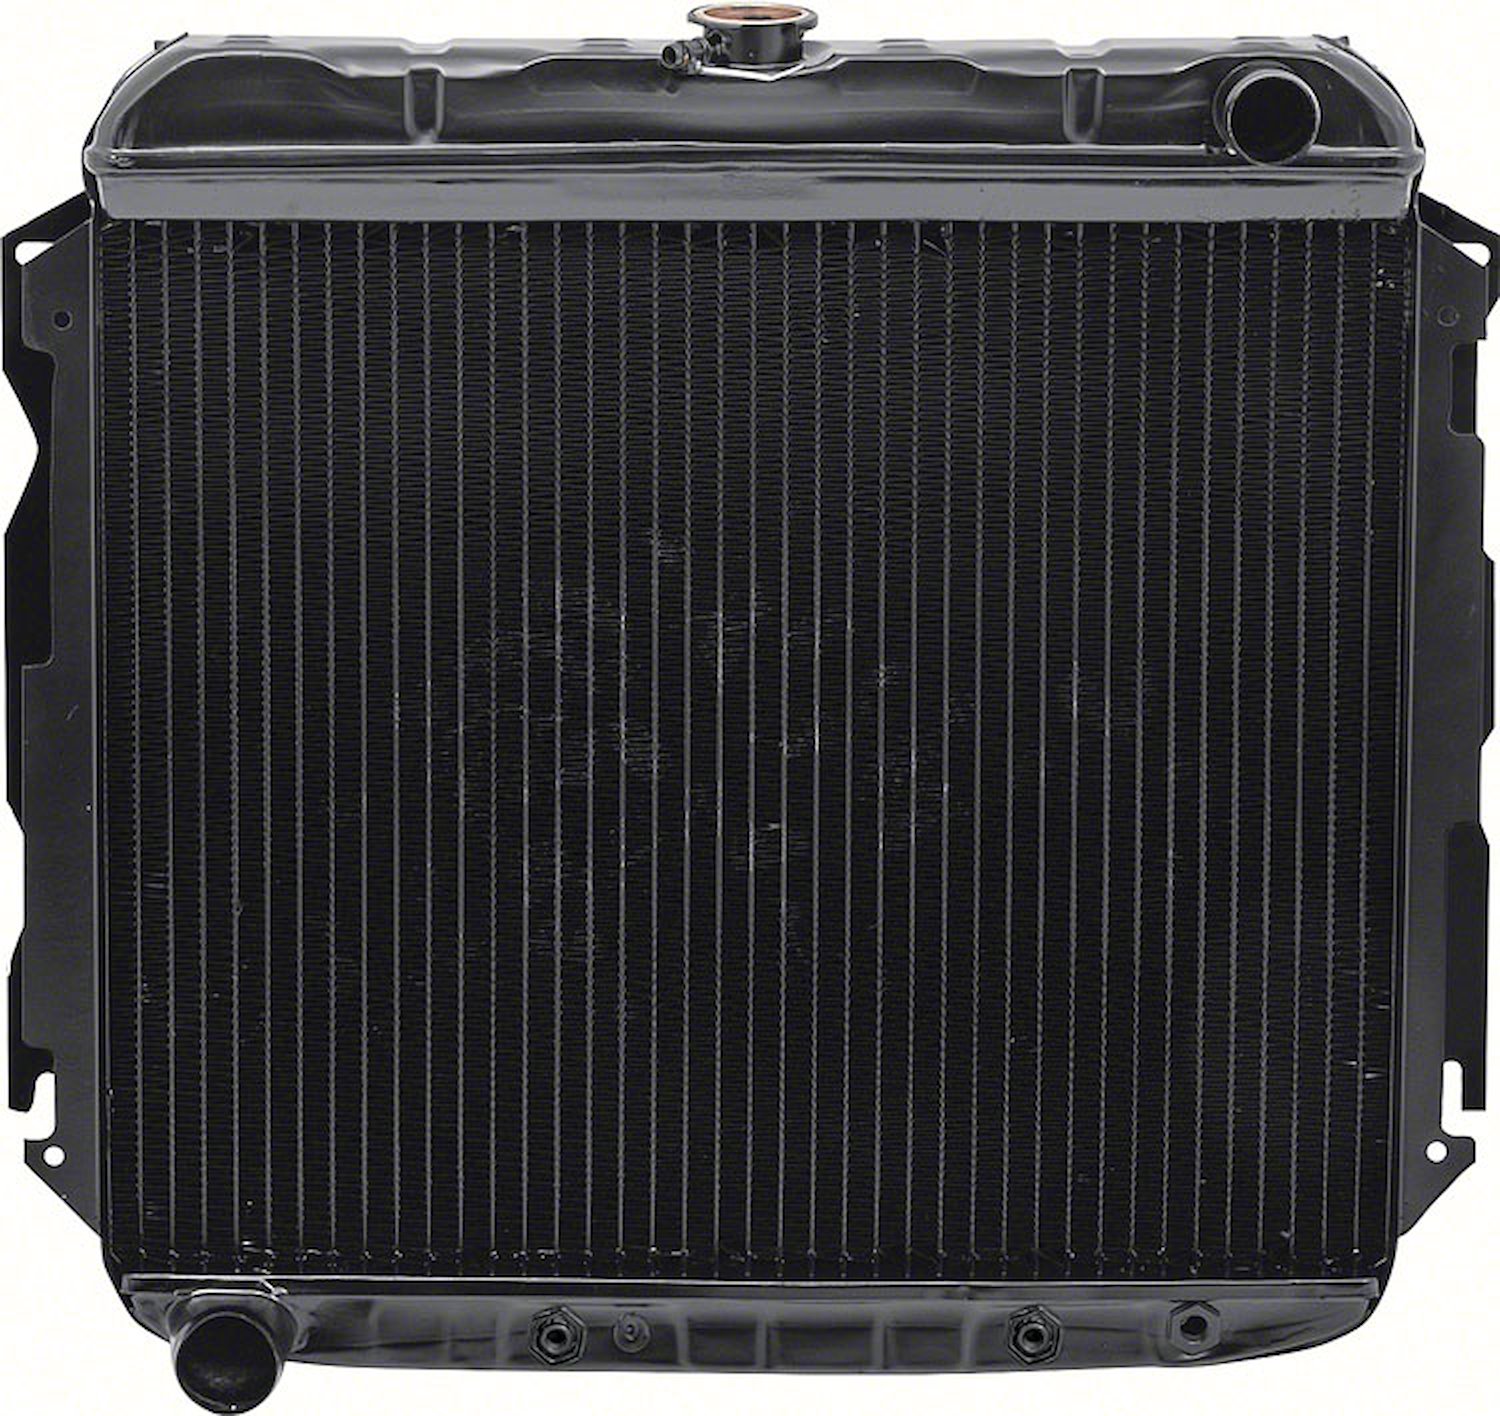 MB2371A Replacement Radiator 1966-69 Mopar B-Body 426 Hemi With Automatic Trans 3 Row